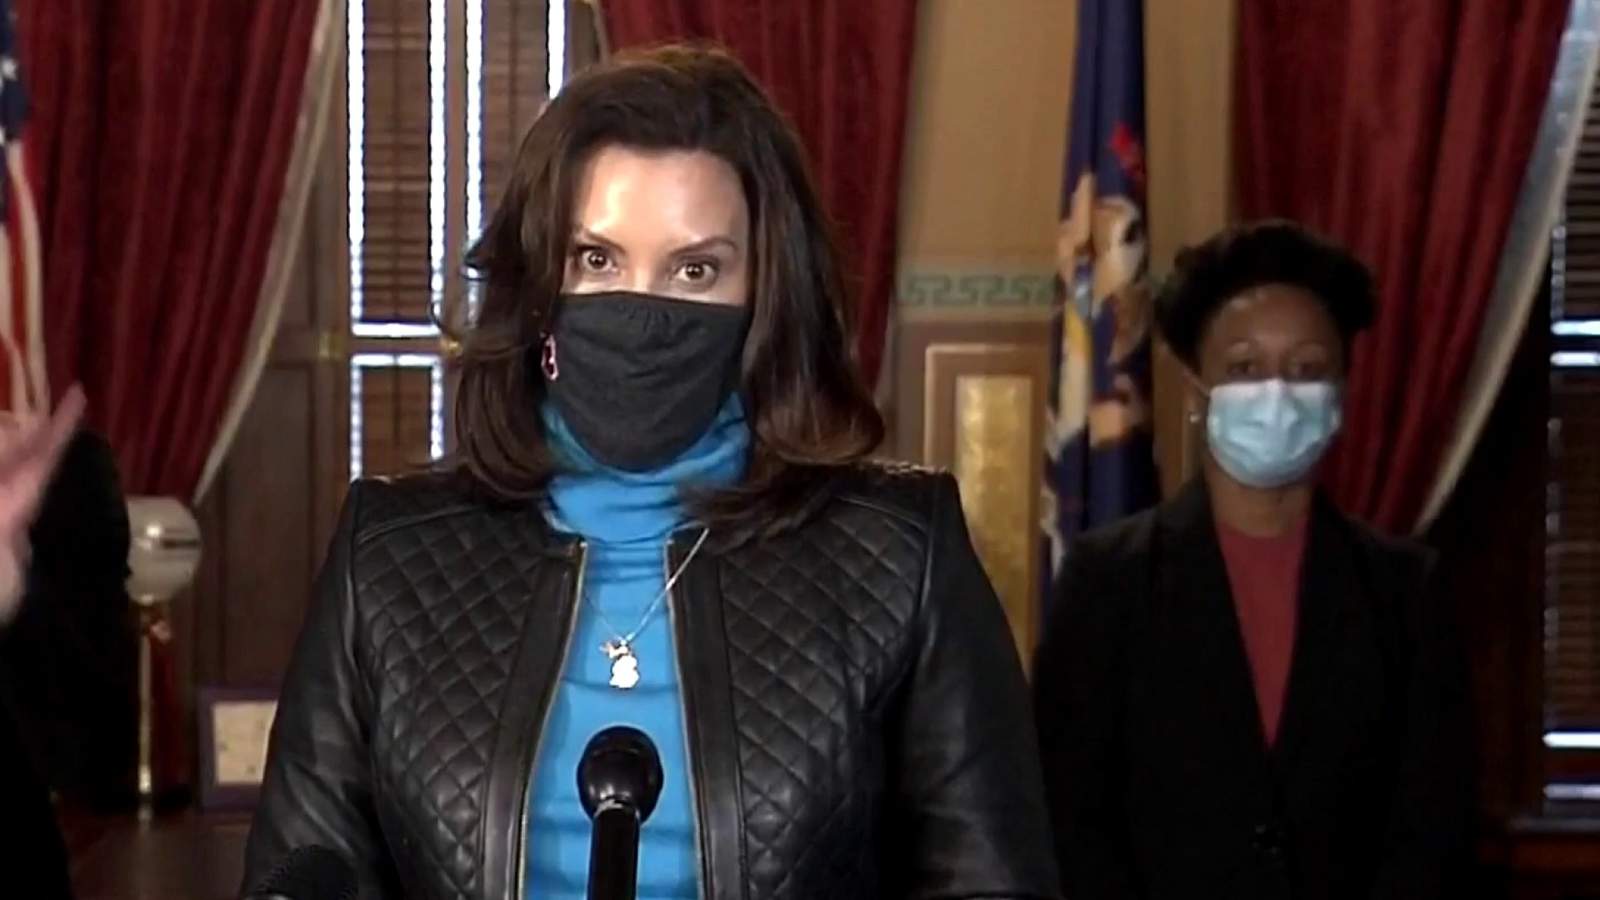 Everything you should know before Michigan Gov. Whitmer’s second COVID briefing this week